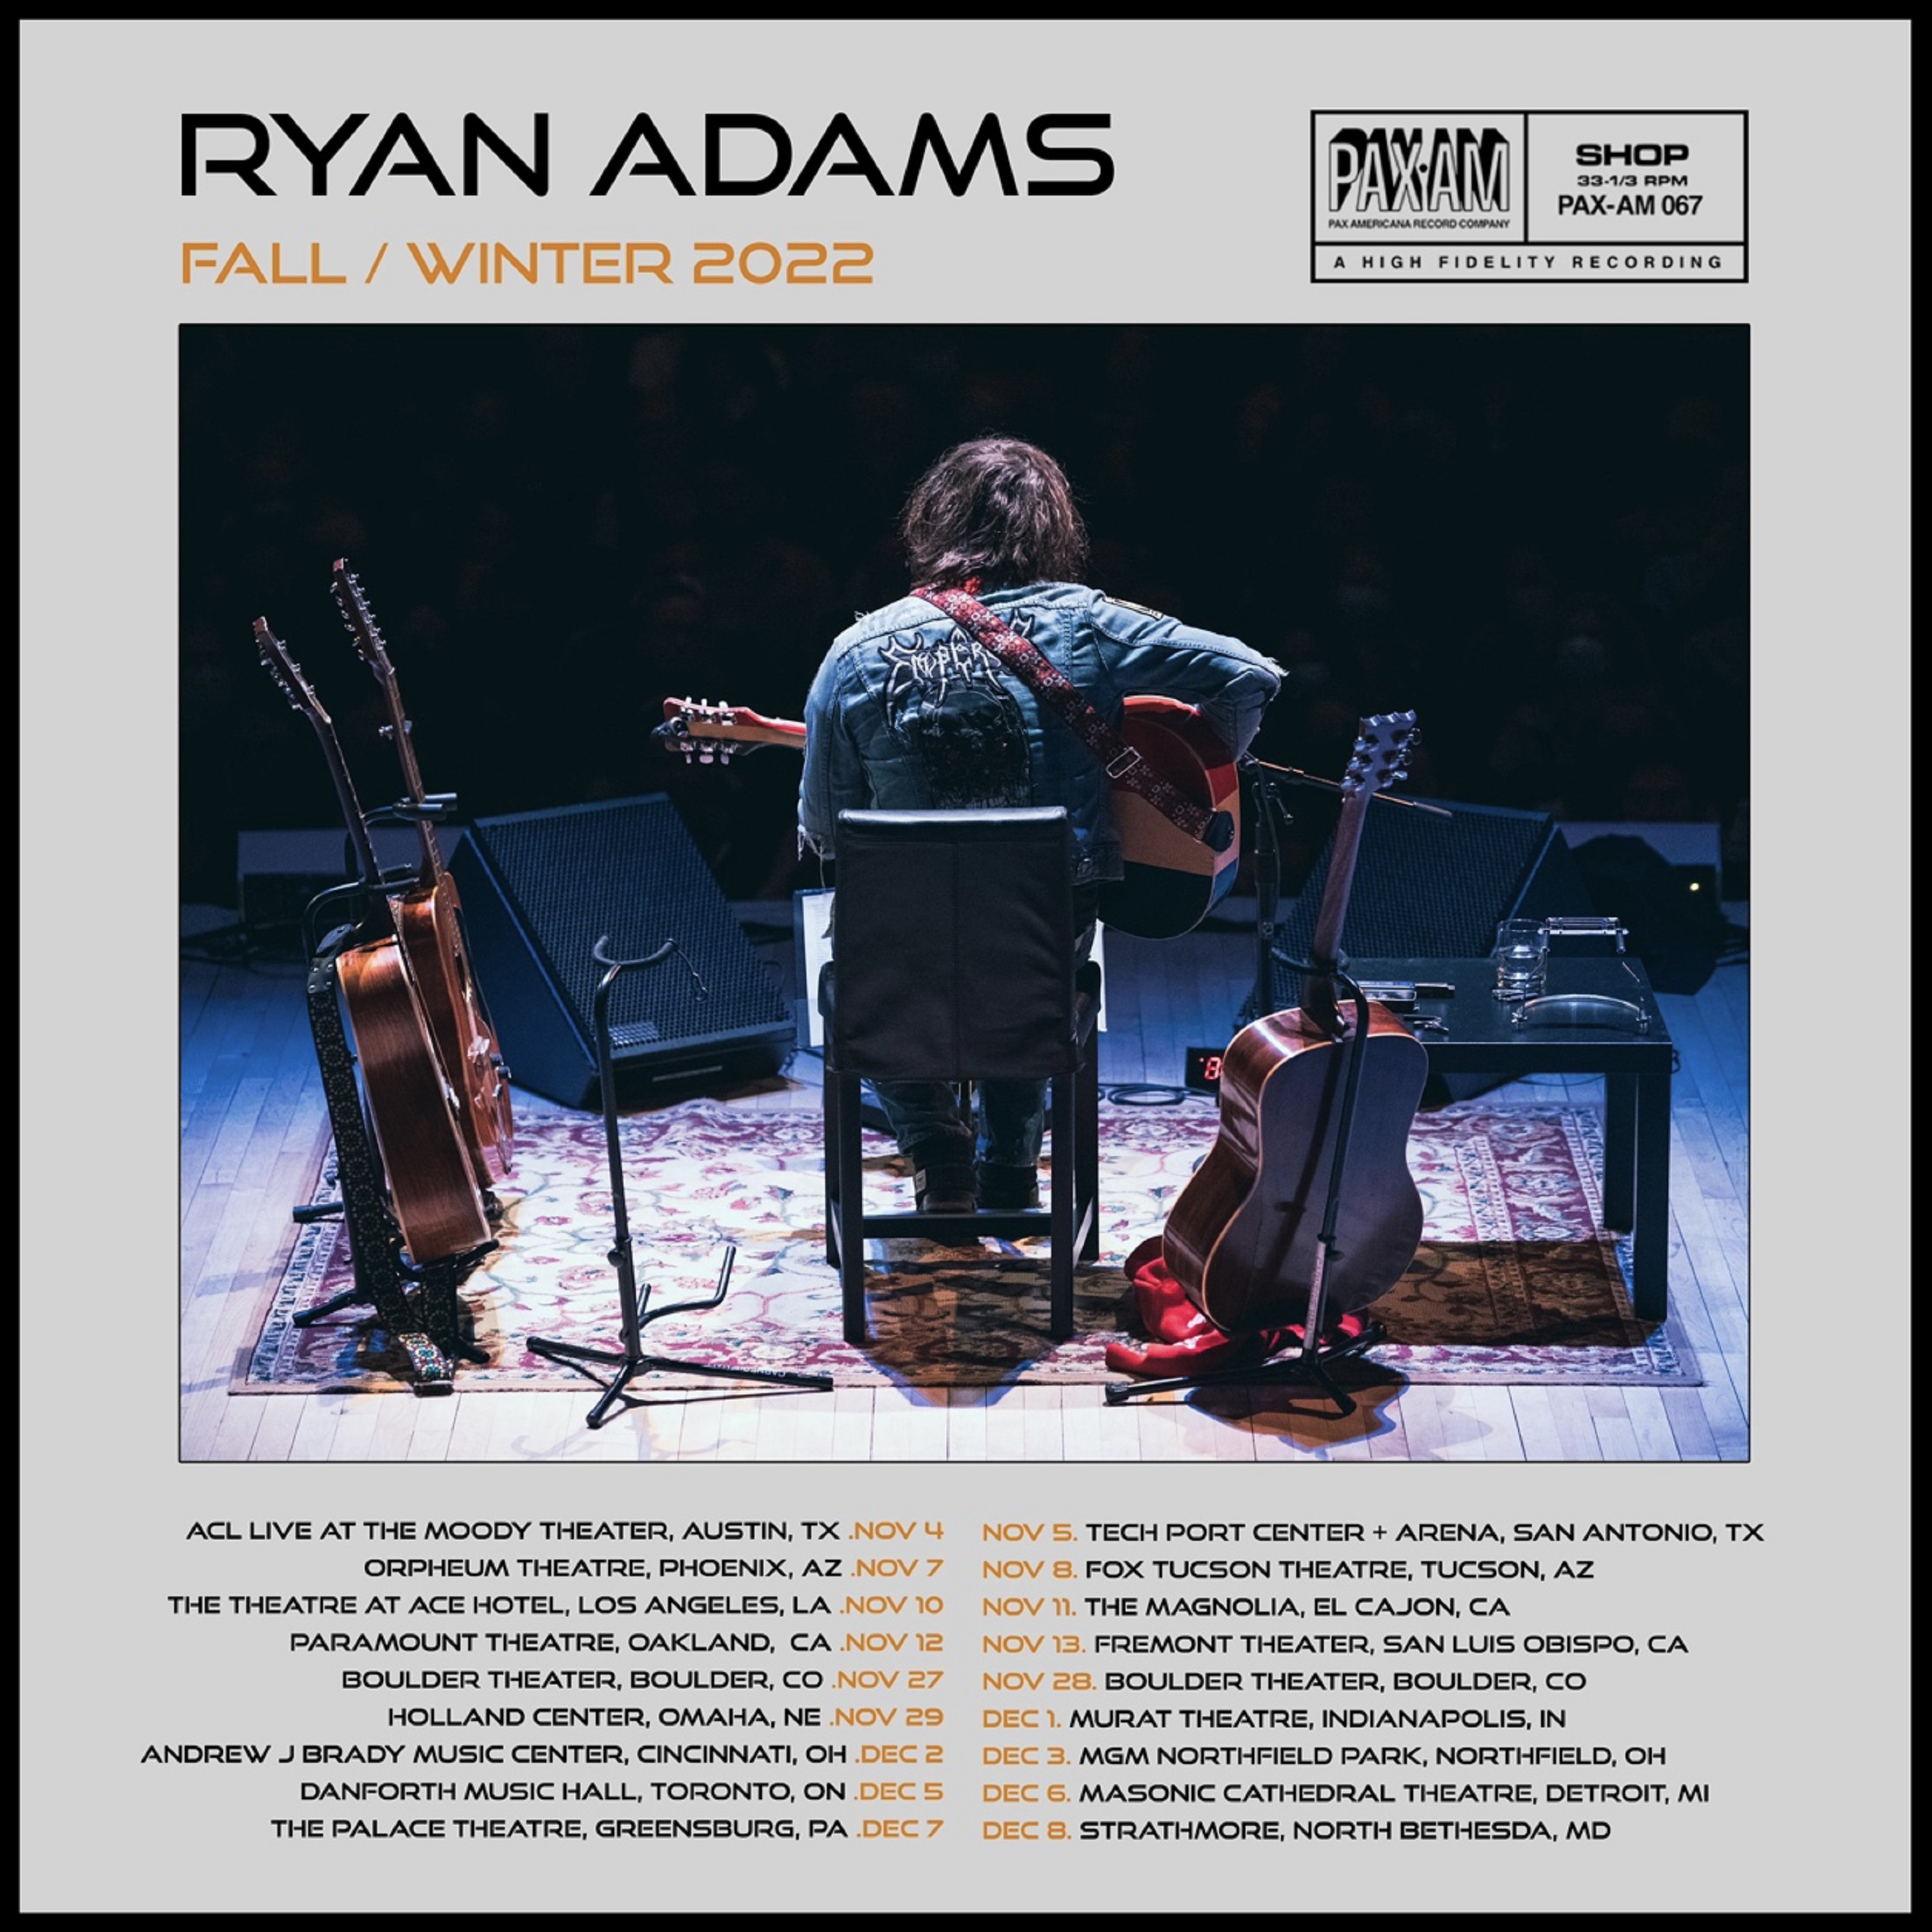 RYAN ADAMS  ANNOUNCES ADDITIONAL 18-SHOW NORTH AMERICAN TOUR IN FALL / WINTER 2022